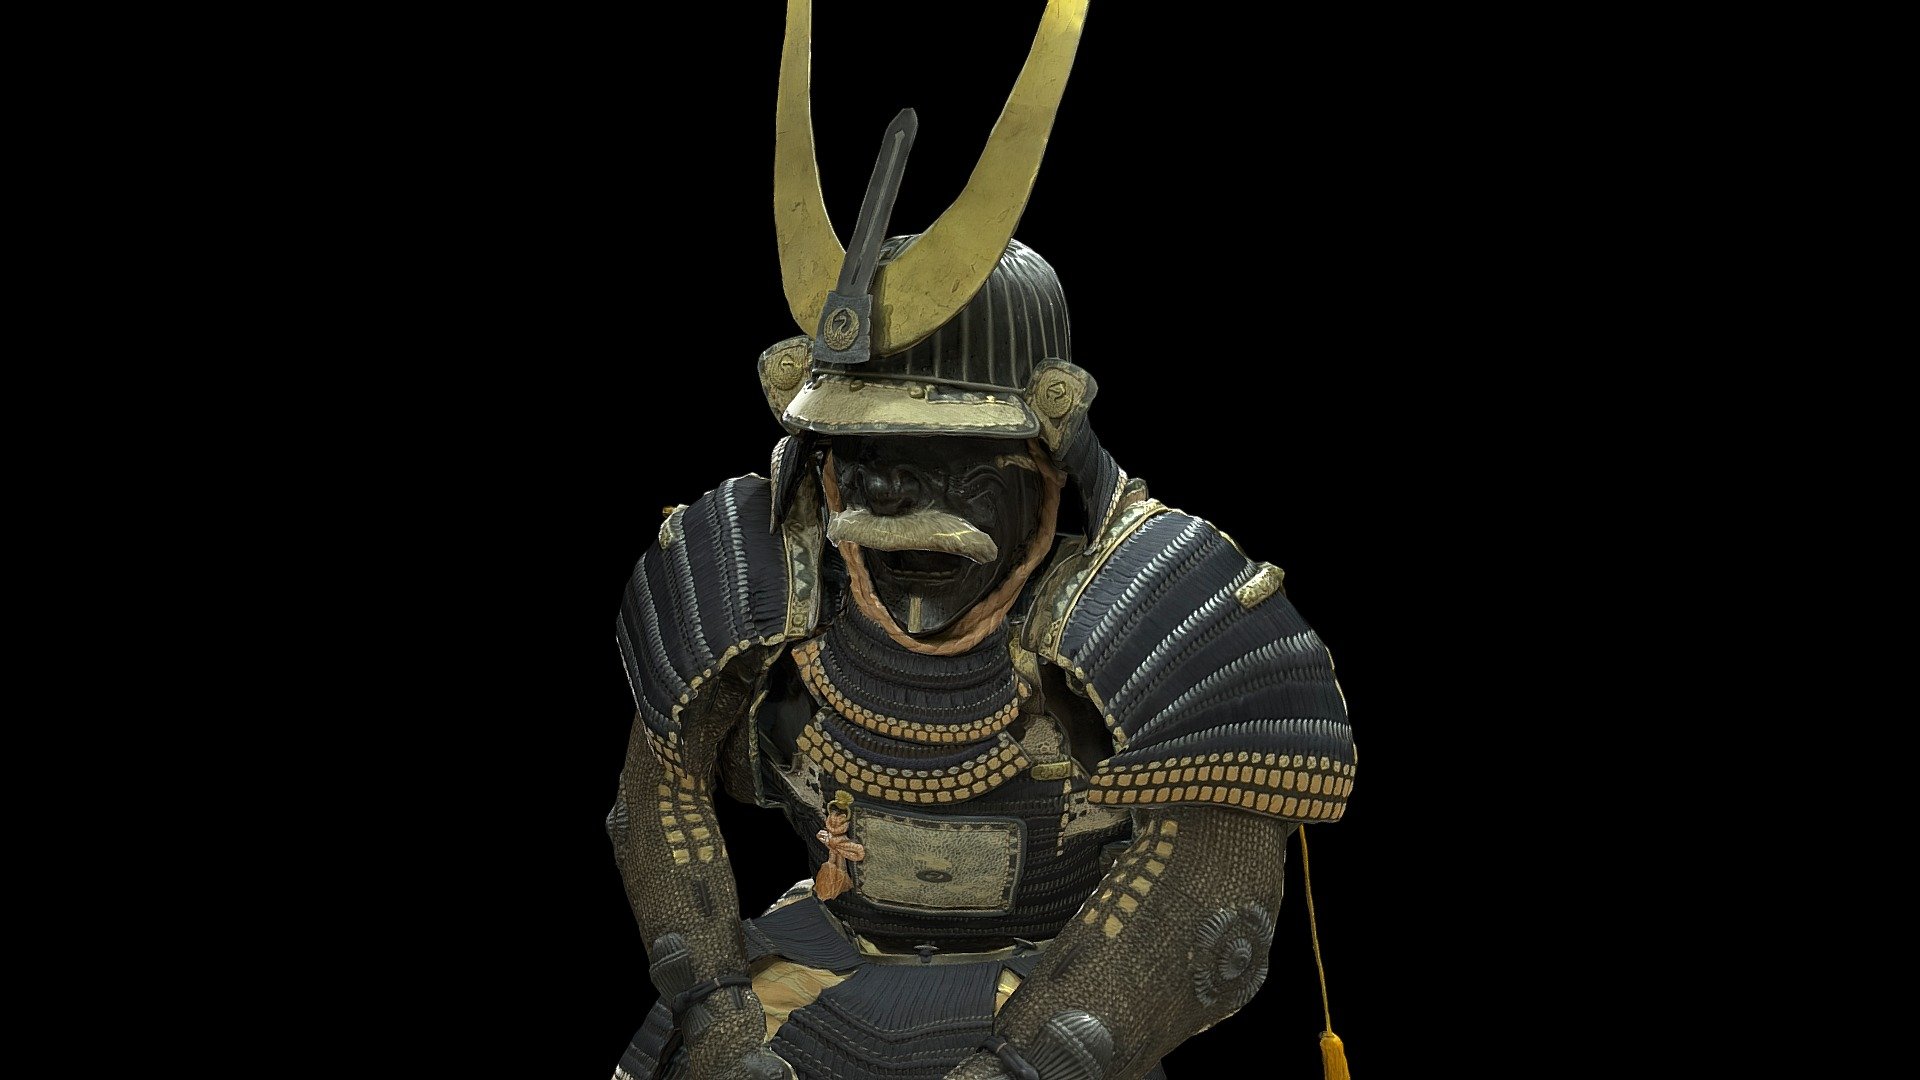 Photogrammetry of Set of armour of Mori Clan, with two-piece cuirass (nimaido gusoku) and surcoat (jinbaori)  located at British Museum (Japanese gallery)

This particular set of two-piece cuirass (nimai-do gosoku) armour is of exceptionally high quality. During the Edo period (1615-1868) the Tokugawa shogunate enacted a four-class system. The warrior class was the hegemonic group, and armour and other related items were displayed to demonstrate their power and prestige.
Armour during the Heian, Kamakura, Muromachi, and Momoyama periods was utilitarian, meant to protect its wearer from injury in battle. Japanese medieval warfare often involved a series of duels where combatants would call out their lineage and rank, offer a challenge and then agree or decline to fight. In this situation the identity of the combatants would be clear. However, in a melee, important or wealthy families, particularly those wishing to ascend in rank, could outfit themselves in more distinctive armour and helmets 3d model